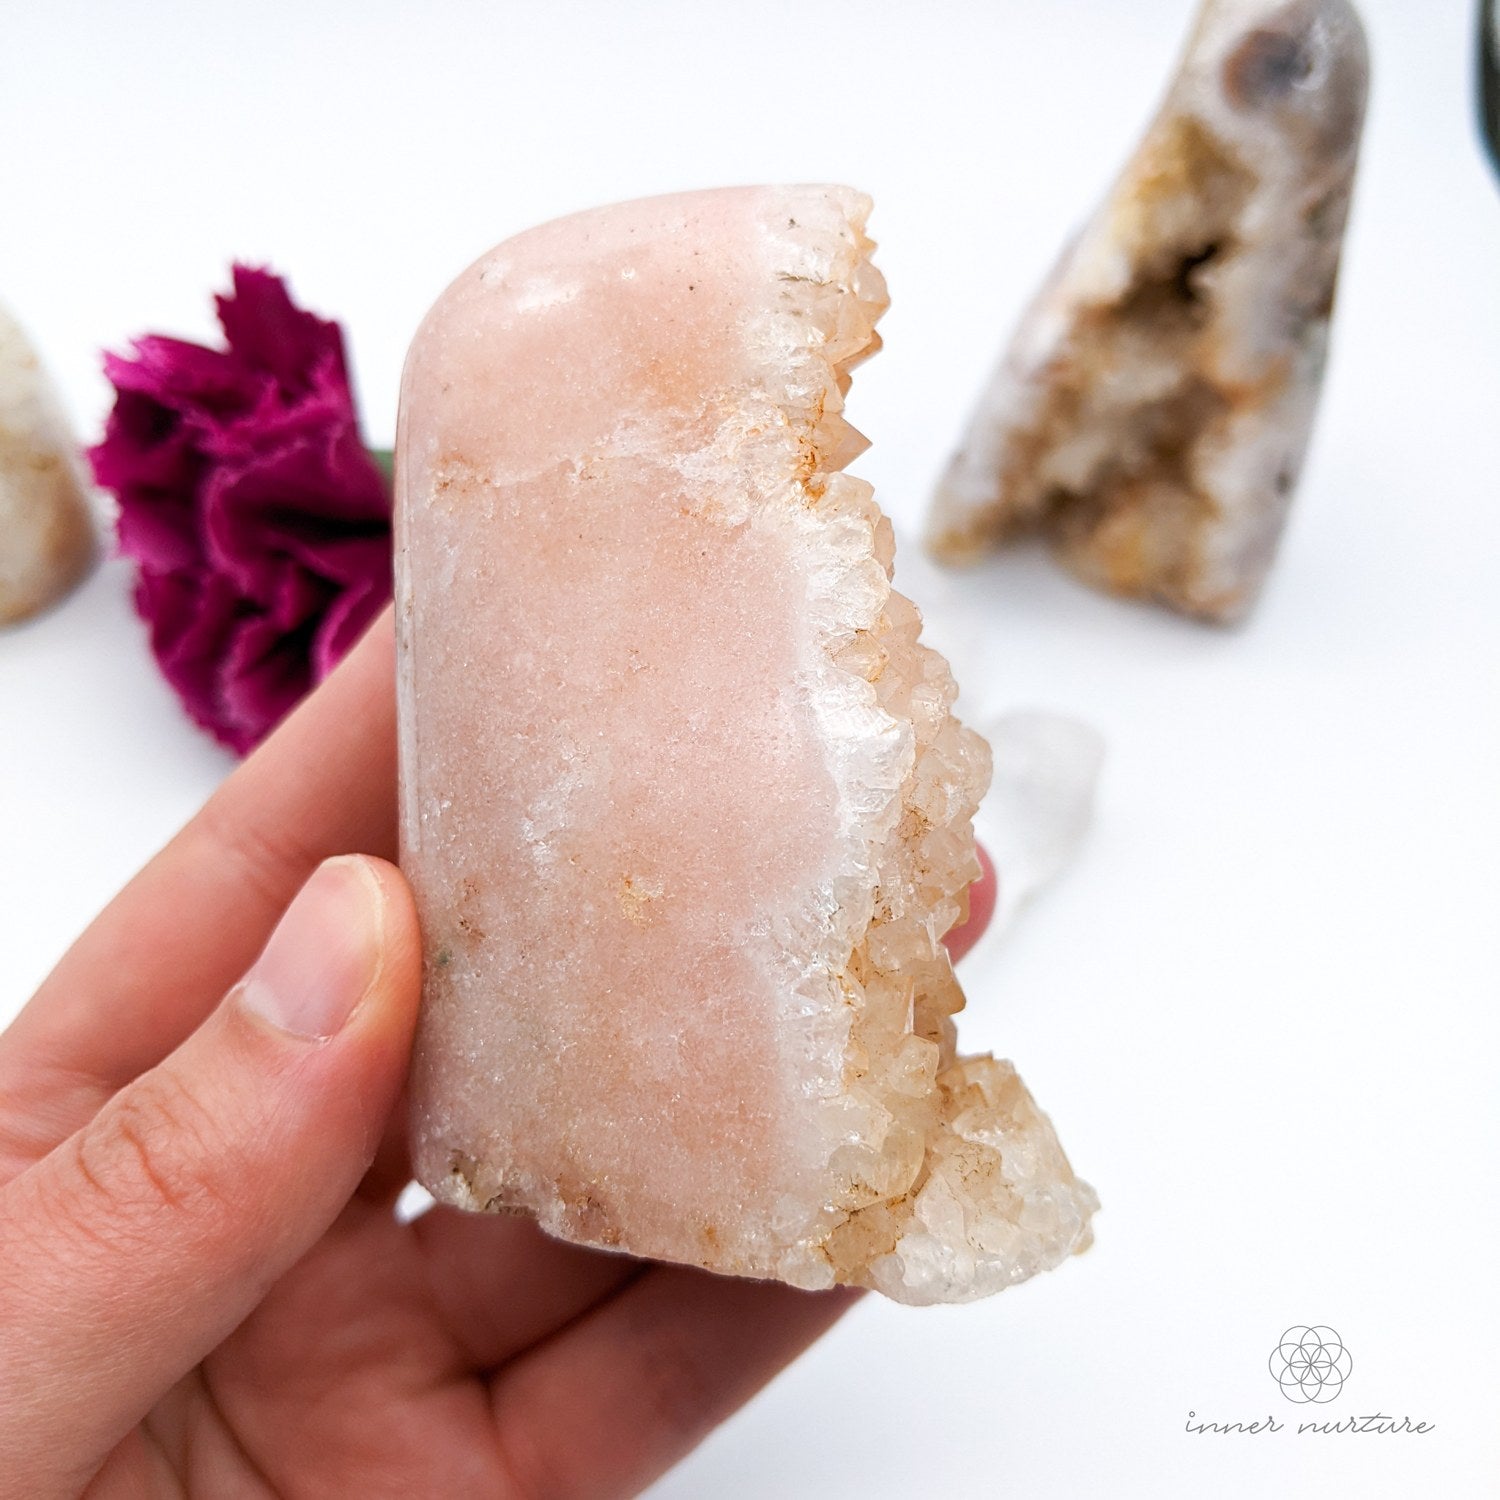 Pink Amethyst Free Form Cluster - 256g | Beautiful Healing Crystals Australia - Shop Online | Ethically Sourced